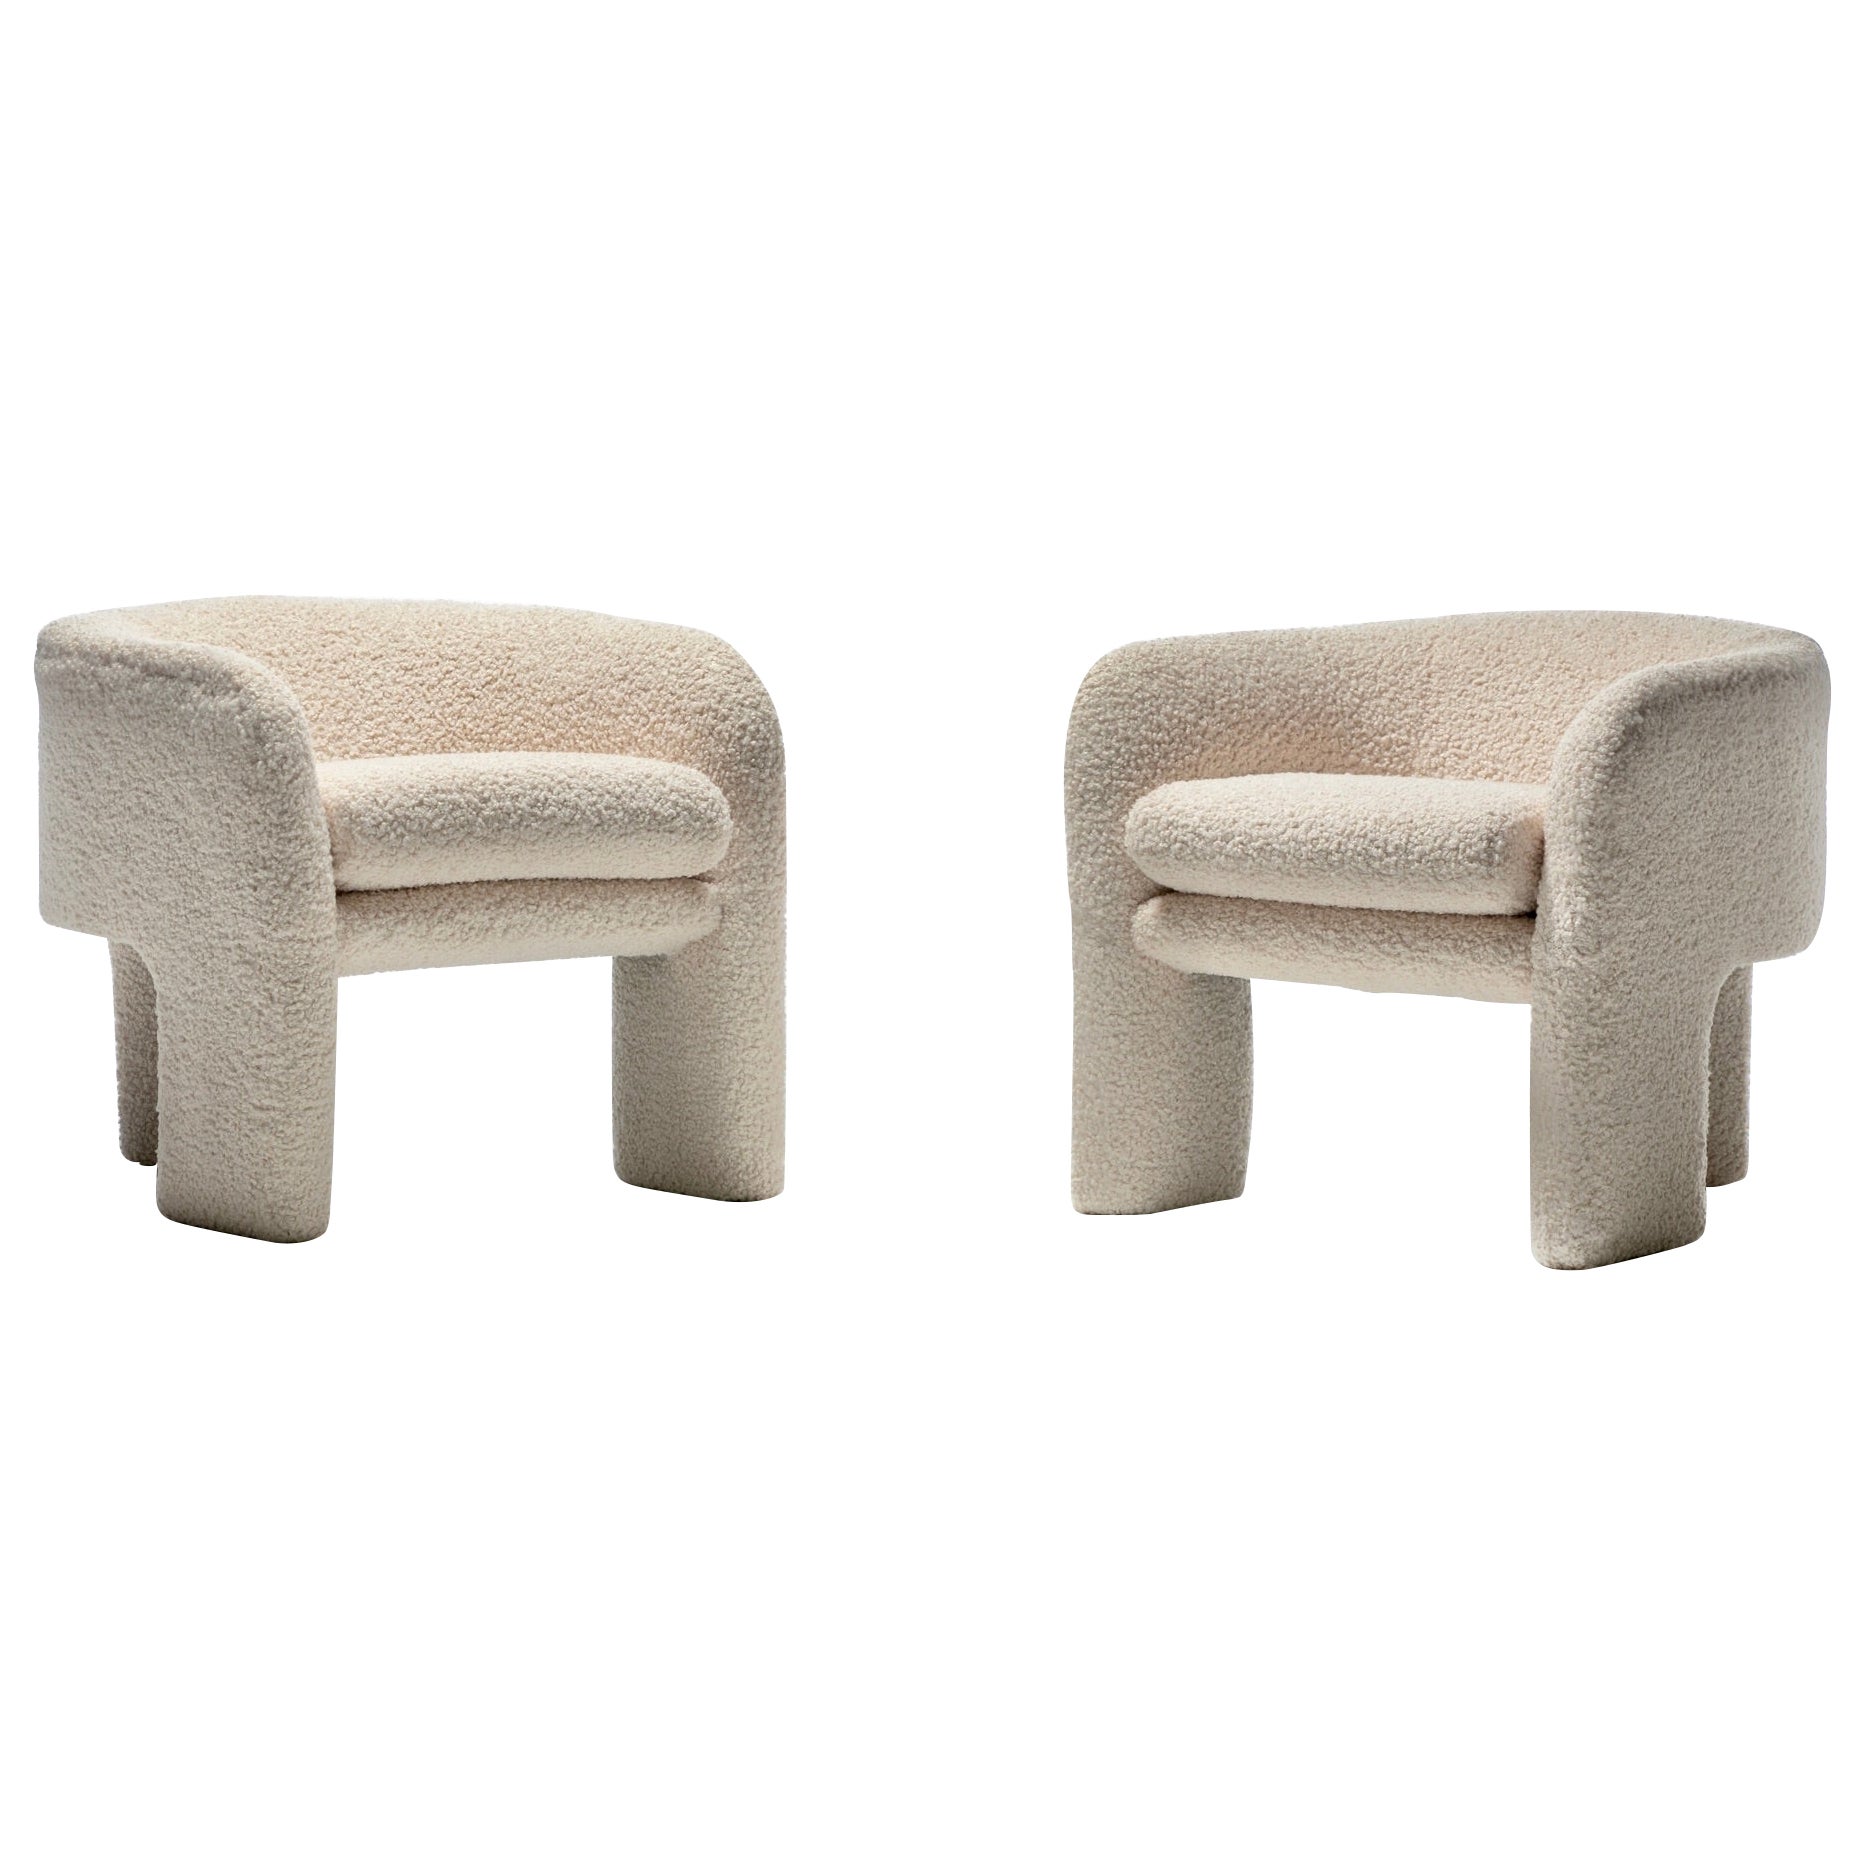 Pair of Preview Tri Leg Post Modern Armchairs Newly Upholstered in Ivory Bouclé  For Sale